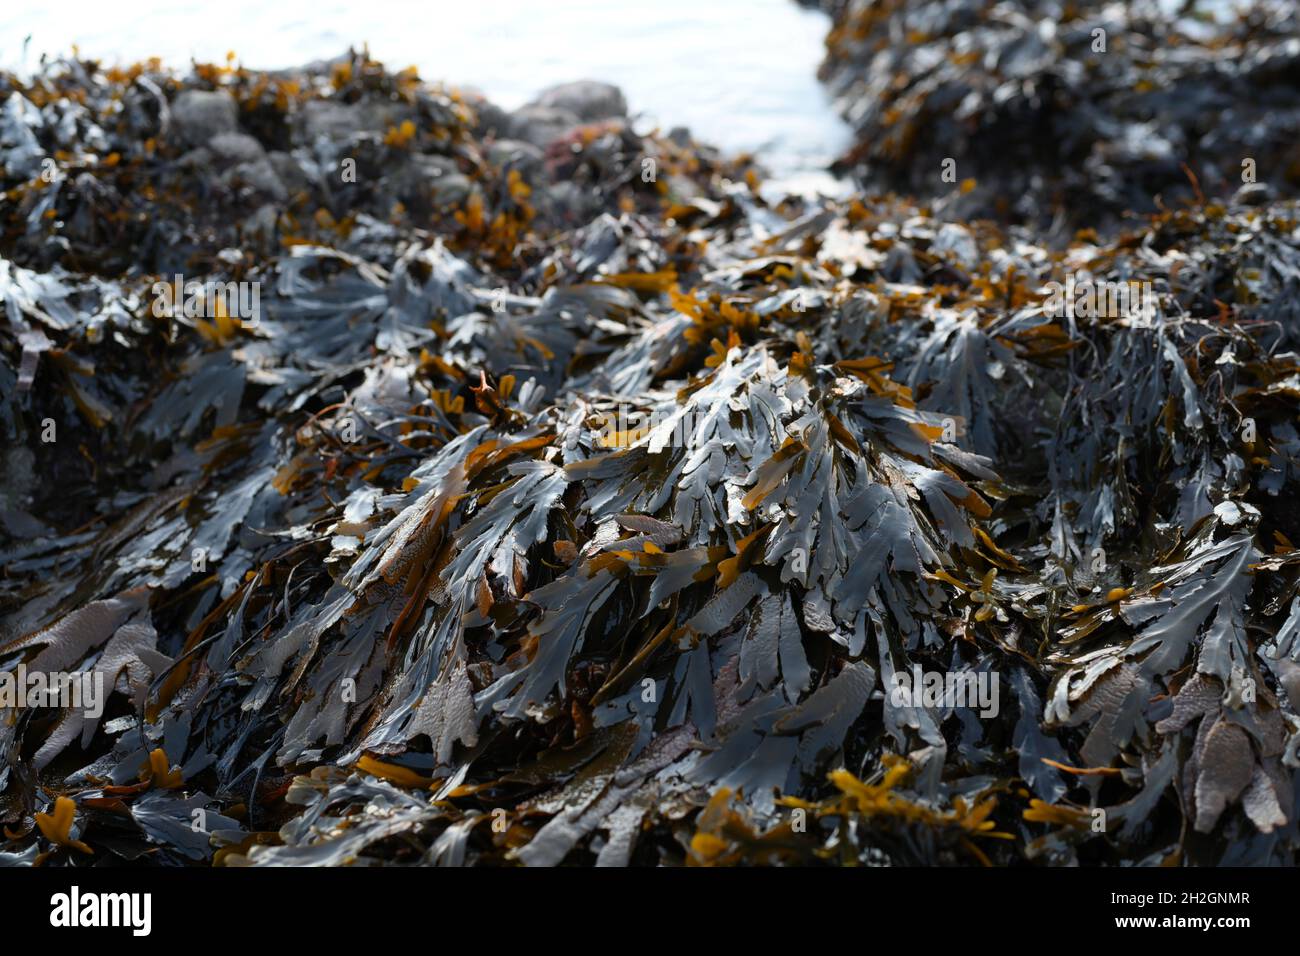 Fucus serratus or Saw wrack seaweed covers the rocky shore at Bracelet bay on the Gower. The morning light illuminate its wet shiny surfaces. Stock Photo